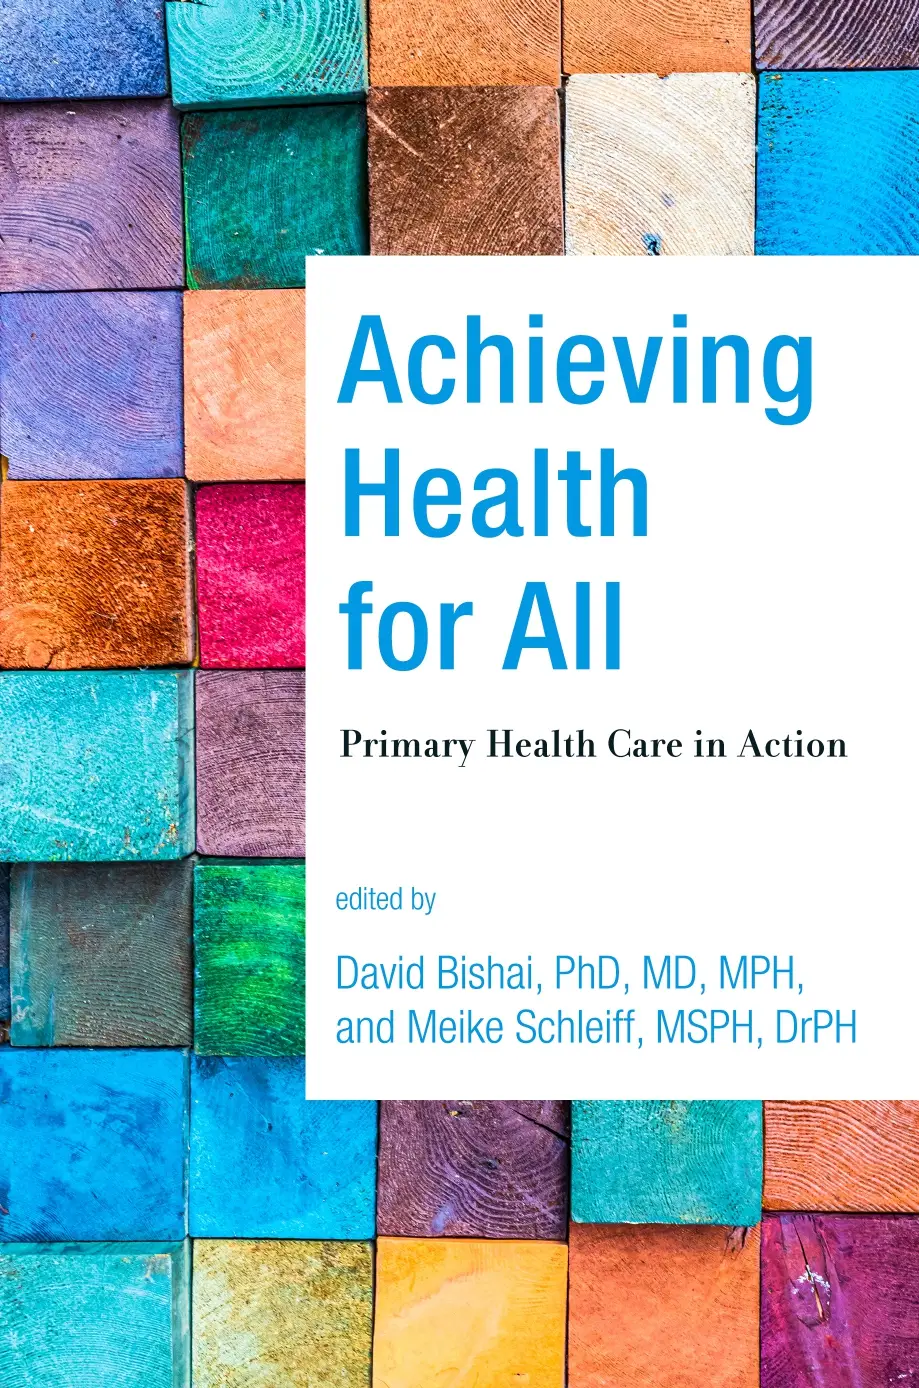 Achieving Health for All